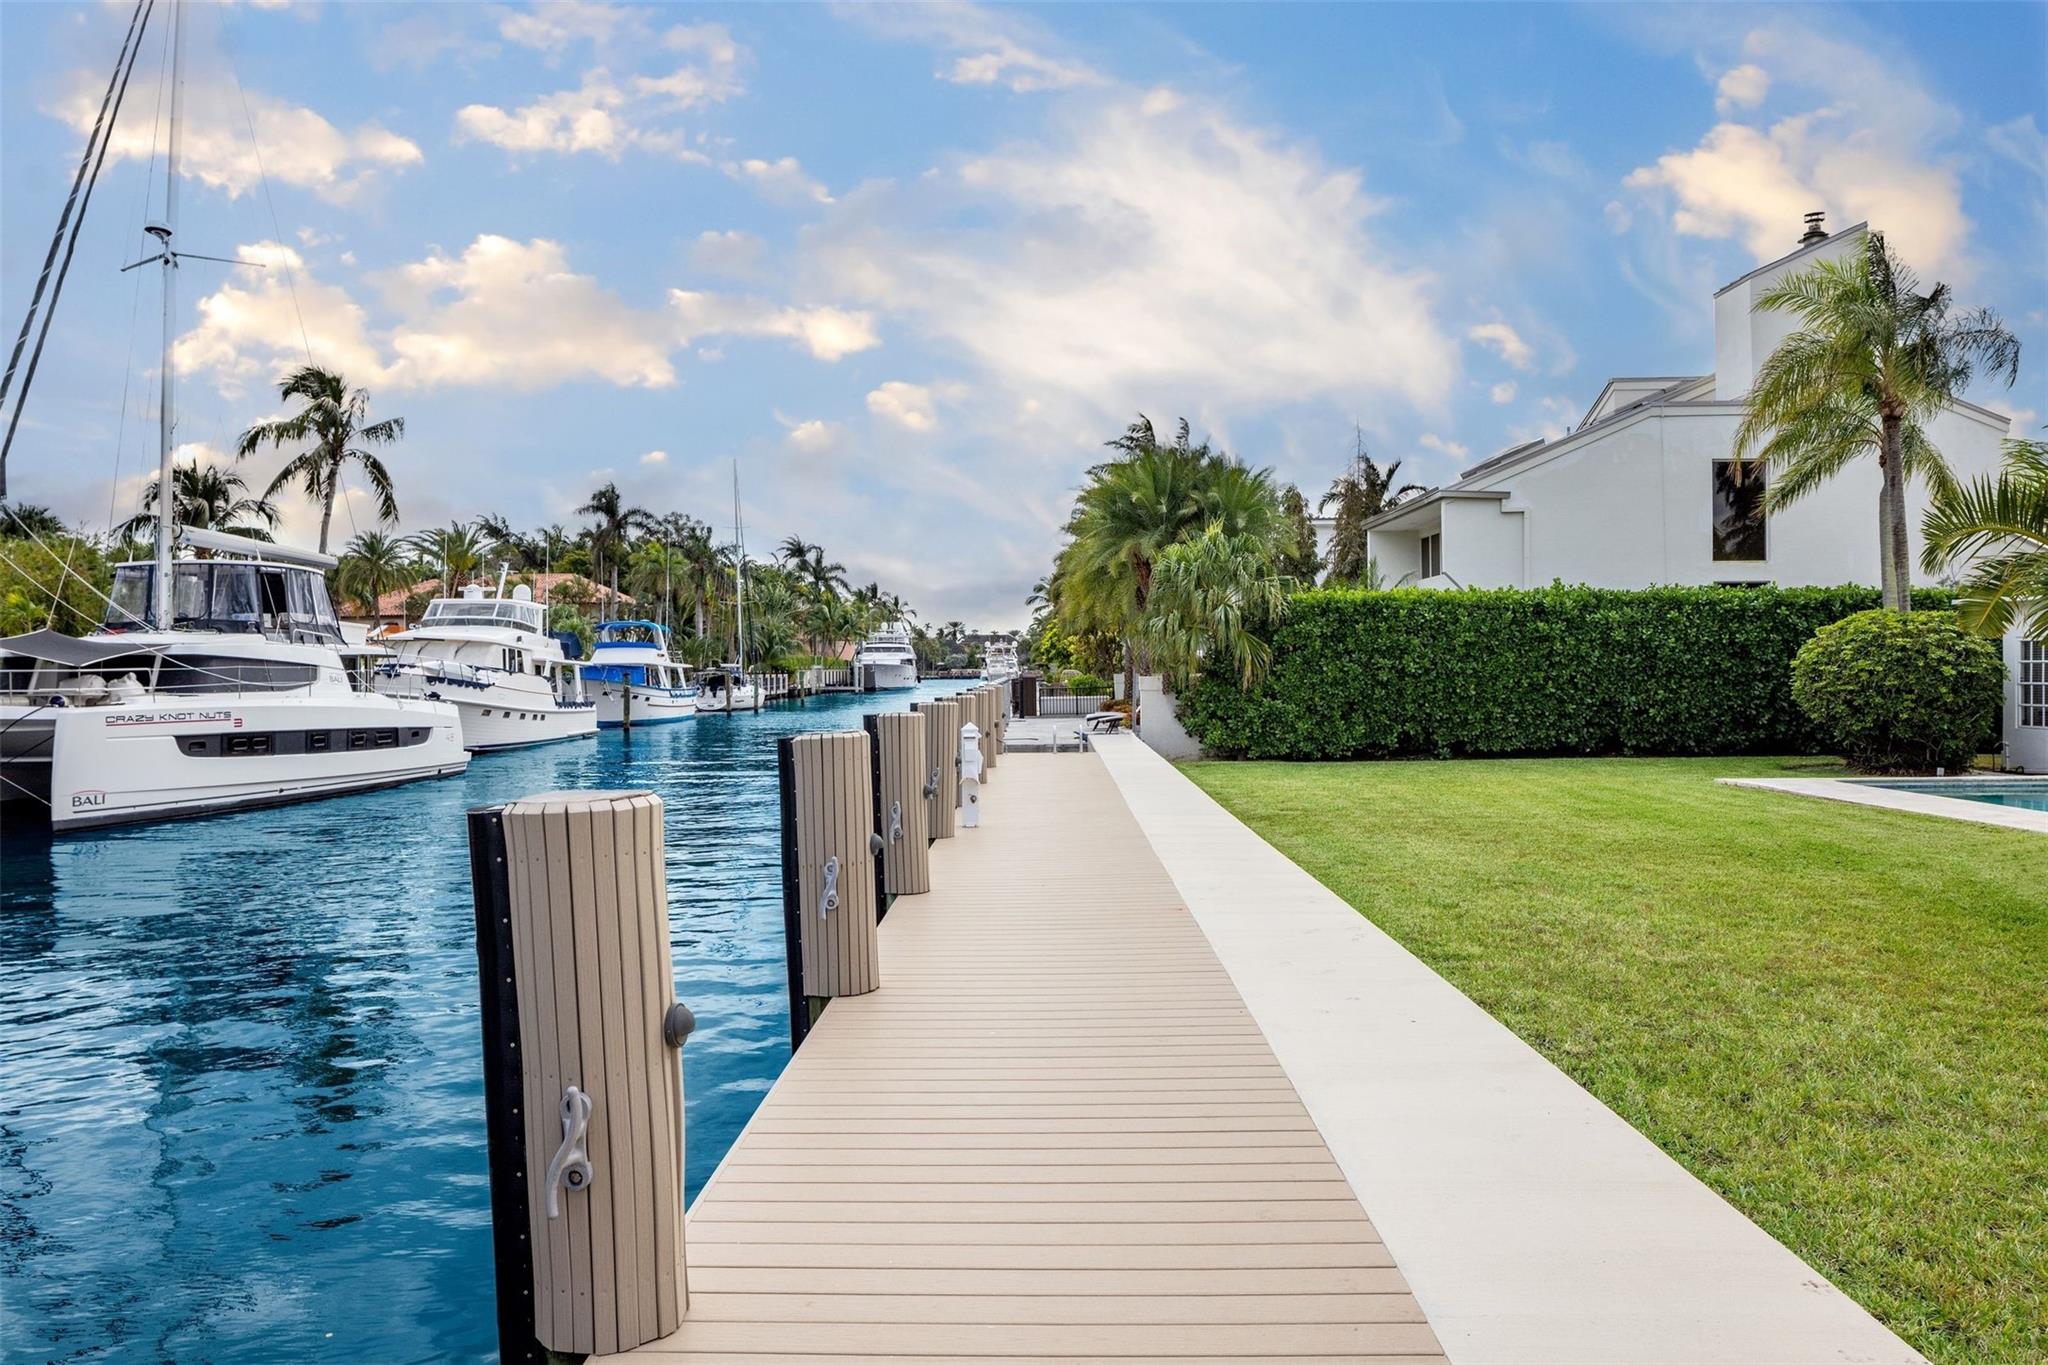 Don't miss this incredible opportunity in the prestigious & gated Riviera Isles! This property offers an exceptional waterfront experience with a fully equipped dock, on an impressive 100' of WF. Ideal for boating enthusiasts, located just off the Intracoastal & only minutes to the ocean, this 3-BD/3-BA home features a well-thought-out split floor plan. The expansive backyard features a covered terrace, a refreshing pool and a highly sought-after rear eastern exposure allowing for tranquil breezes year round. This home offers the added advantage of being within walking distance to the beach, exquisite dining establishments, upscale shops, and renowned art galleries and it's proximity to the airport. Don't let this opportunity slip away! Income Investment opportunity!